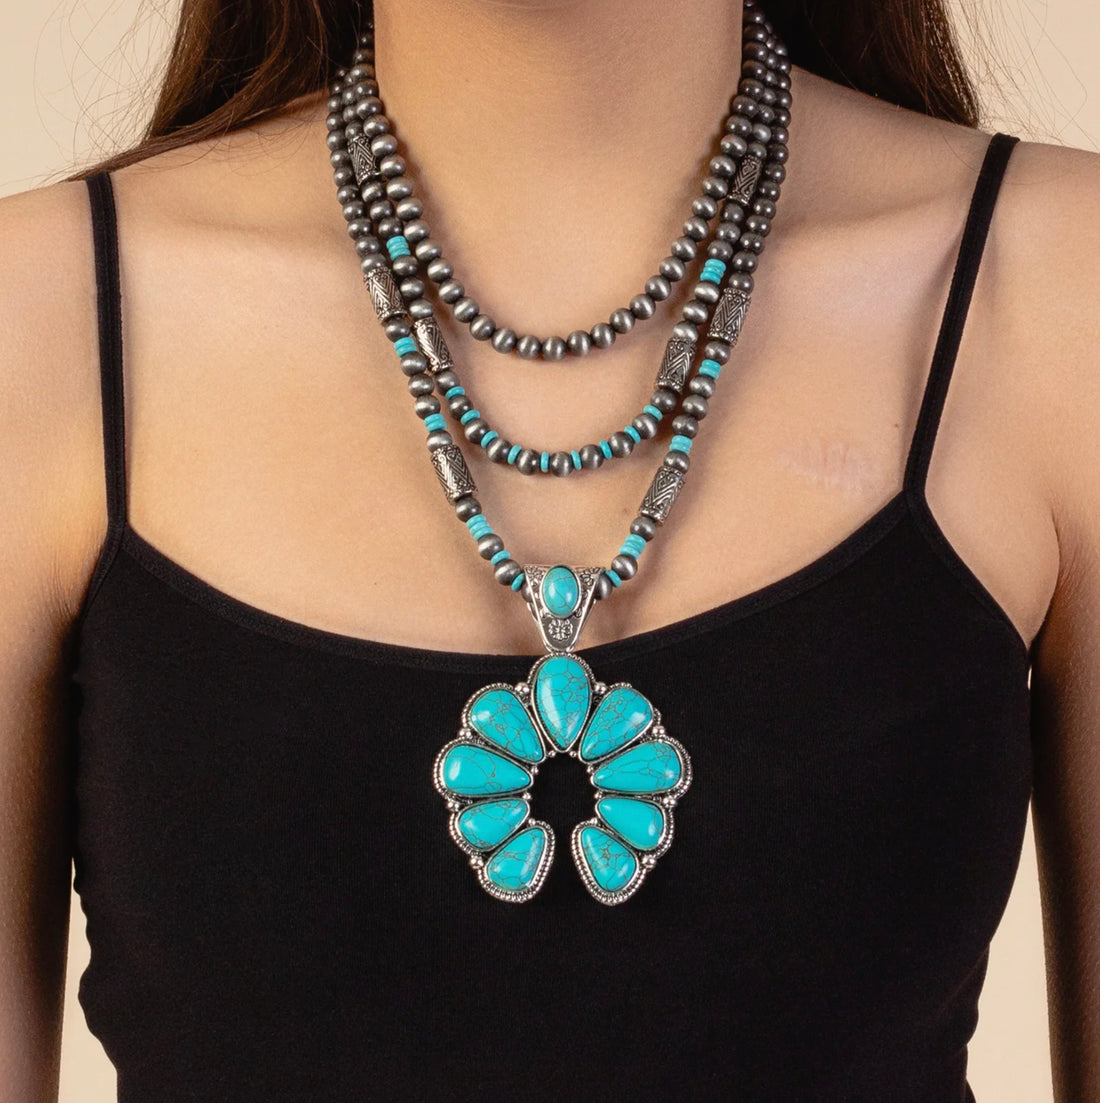 Turquoise and Silver Layered Squash Bottom Necklace with Matching Earrings